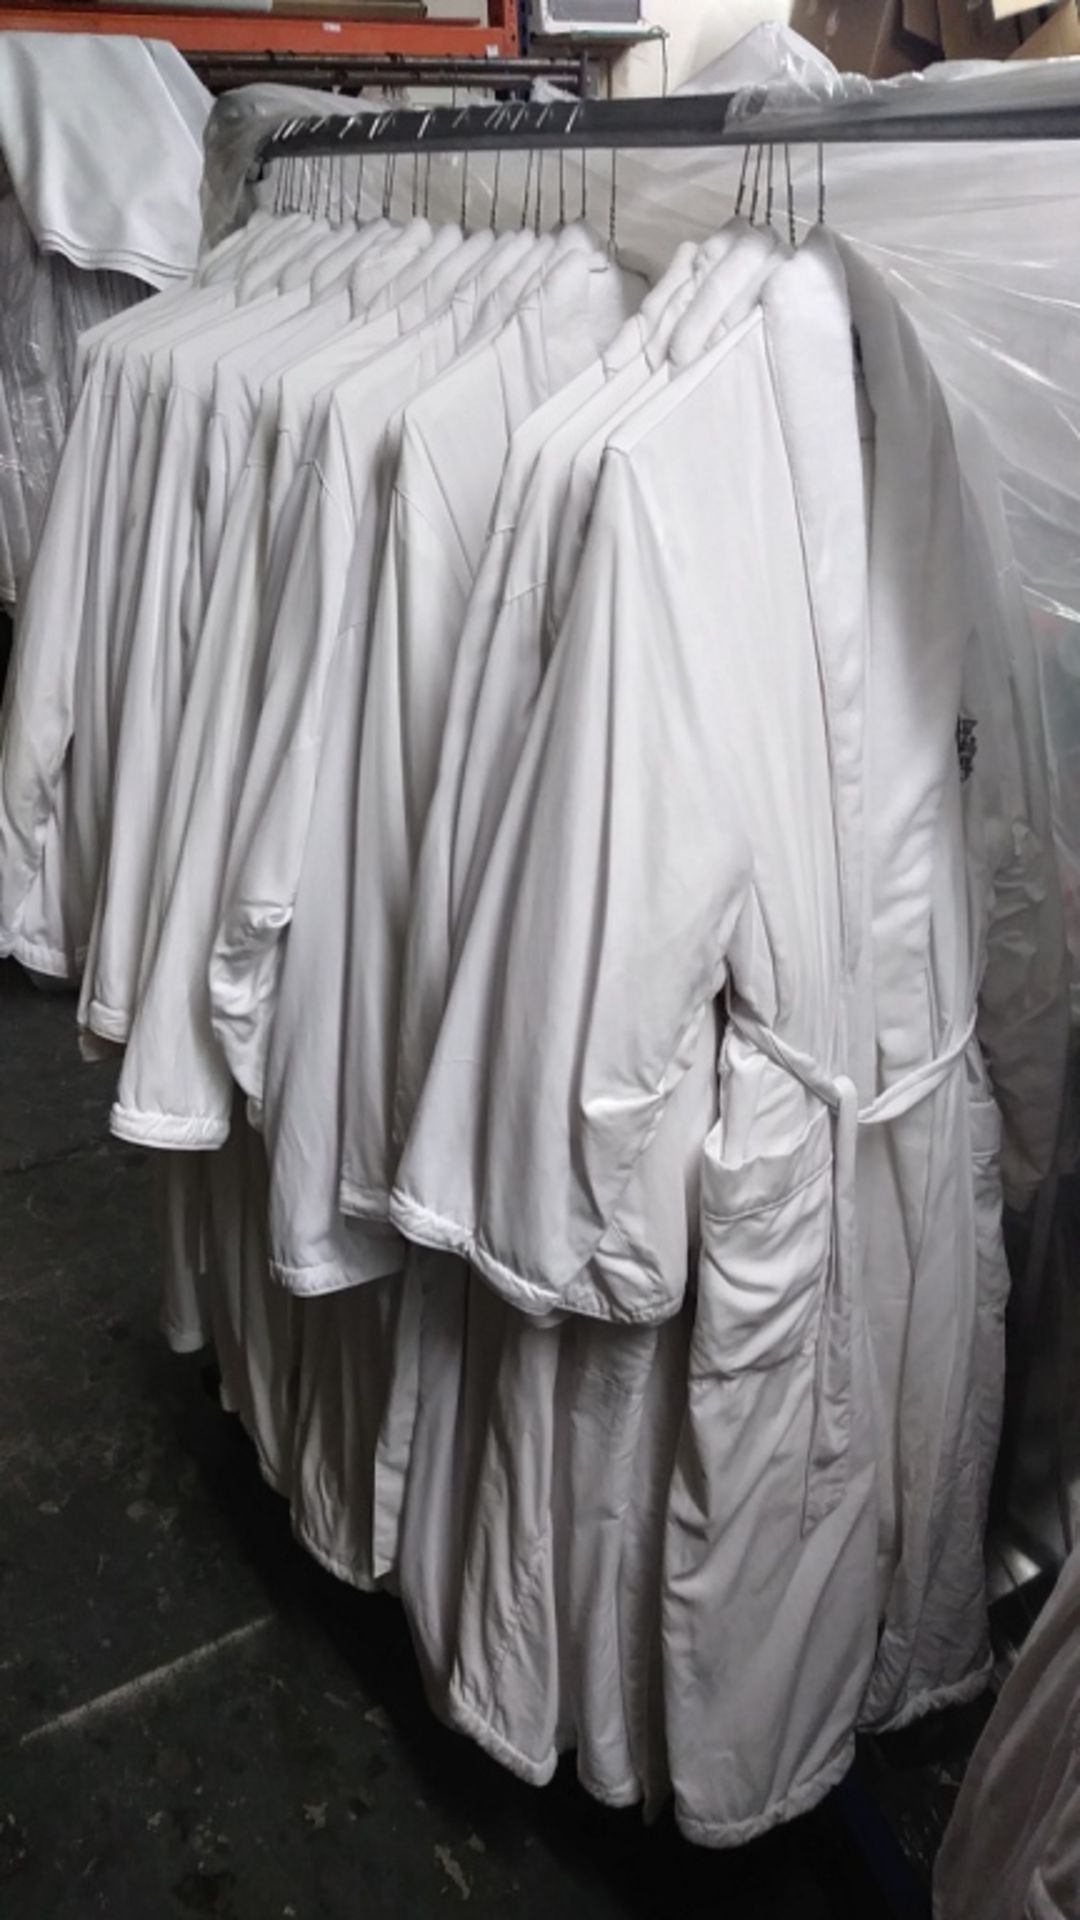 Used White Bath Robes - Assorted Sizes (INCLUDES 20 ROBES) - Image 3 of 5